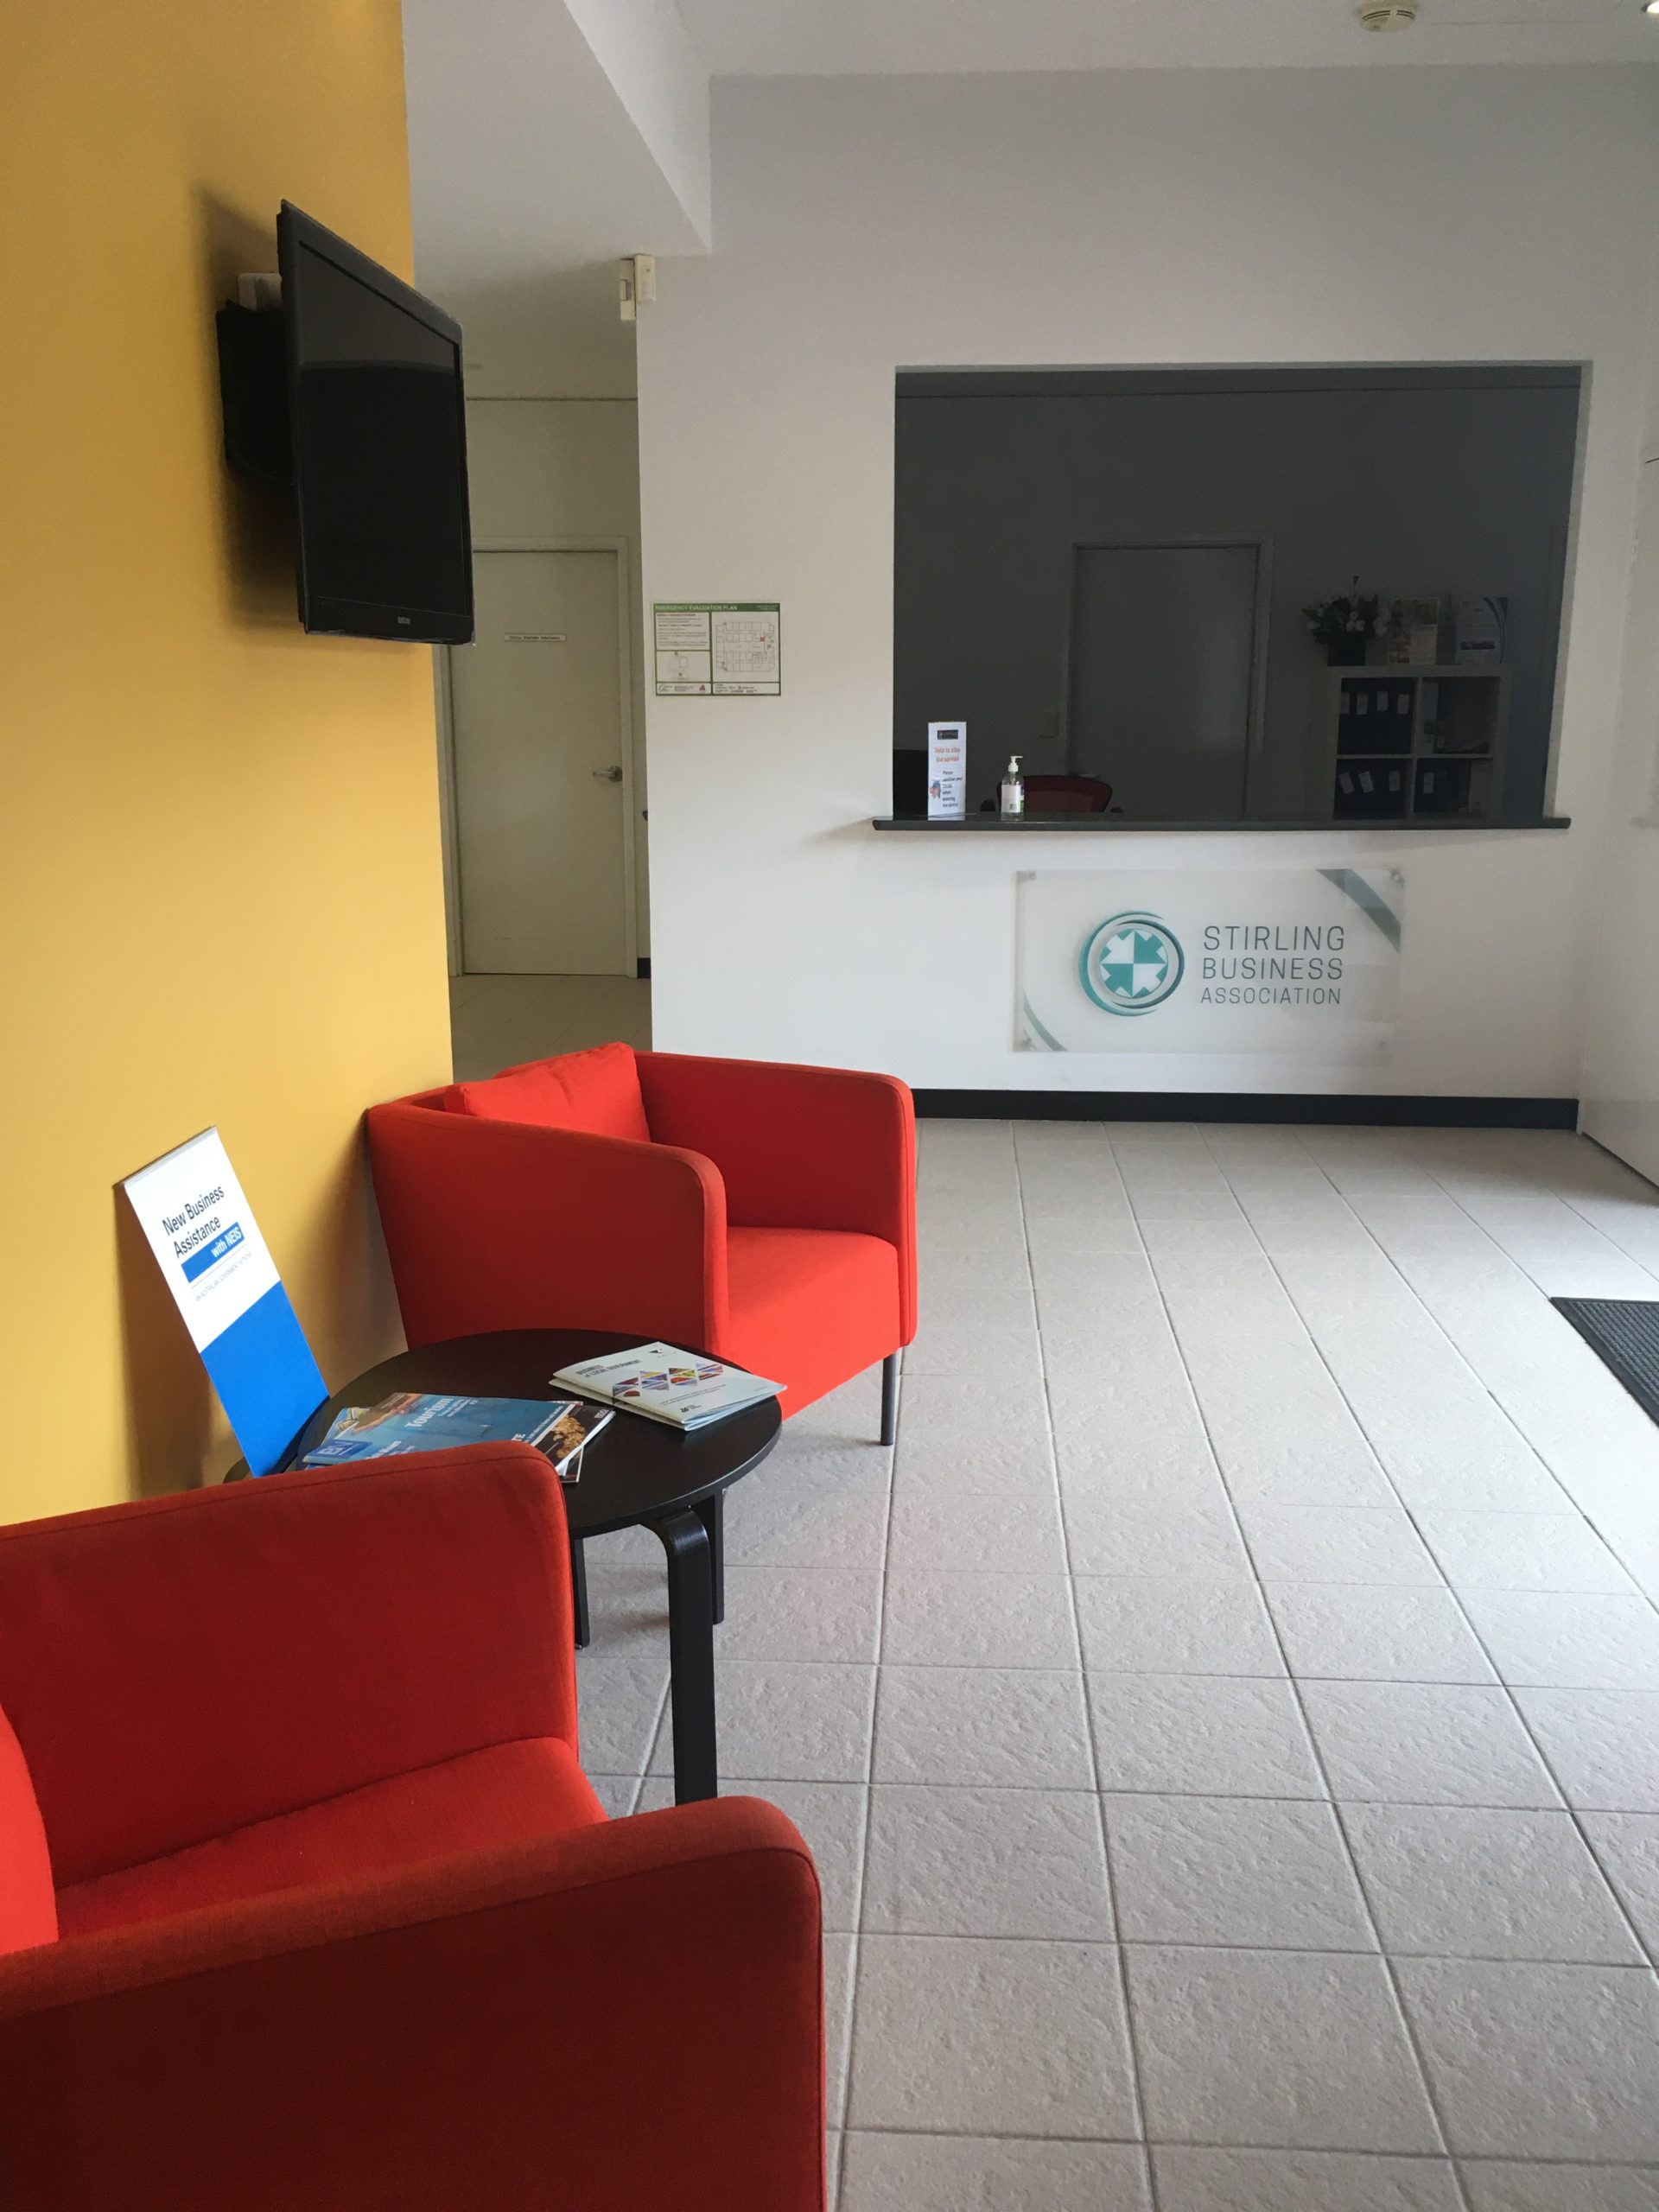 Photo of the reception area